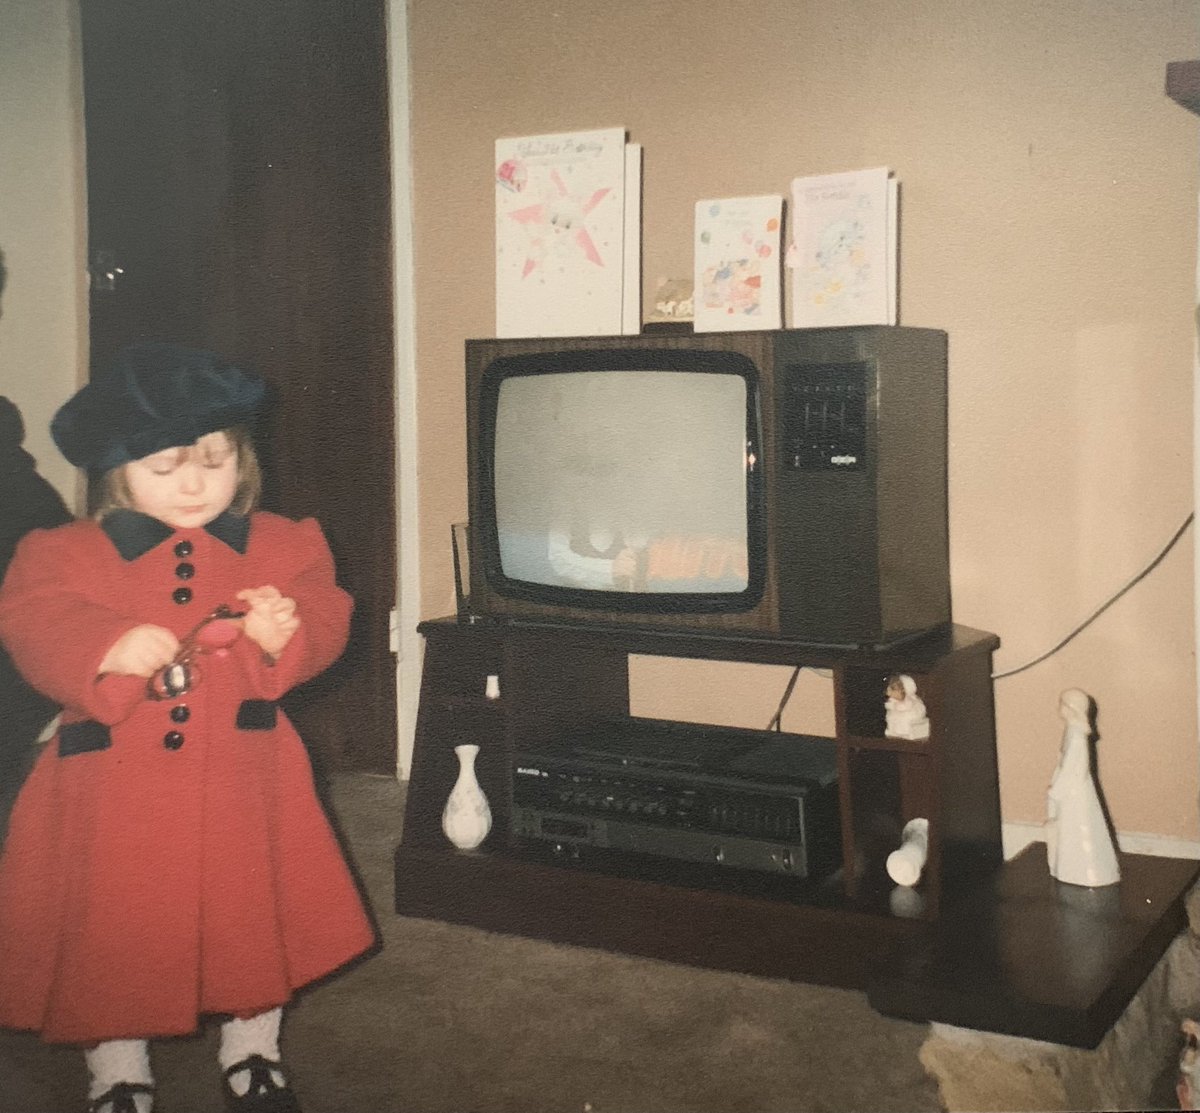 Sometimes I kid myself that I’m still young and then I see photos like this and feel ancient. Look at that telly! Another world.